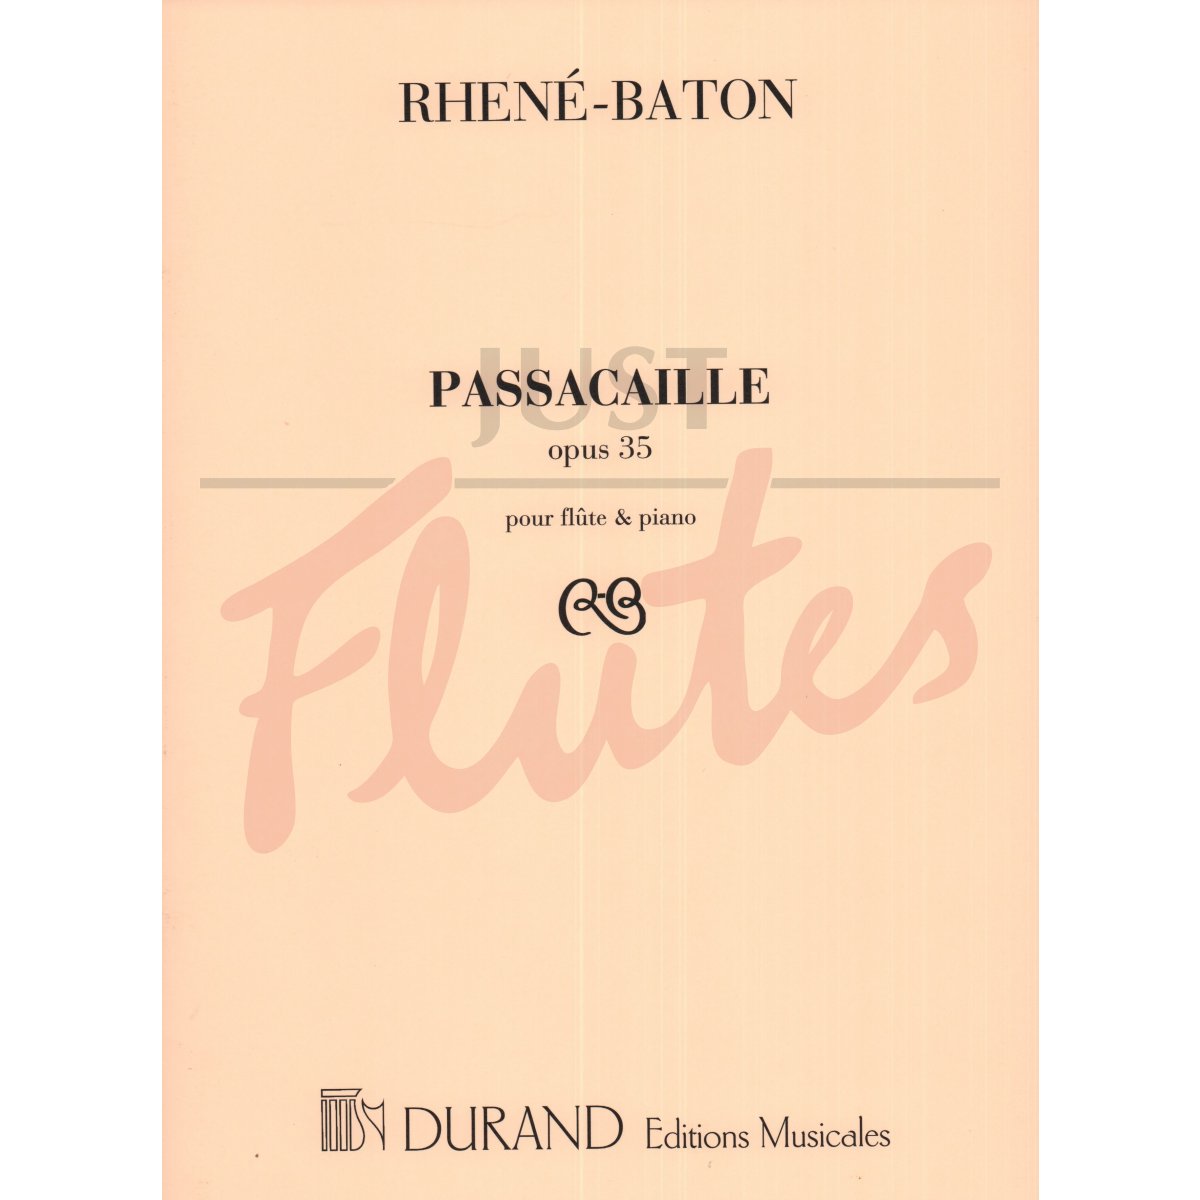 Passacaille for Flute and Piano